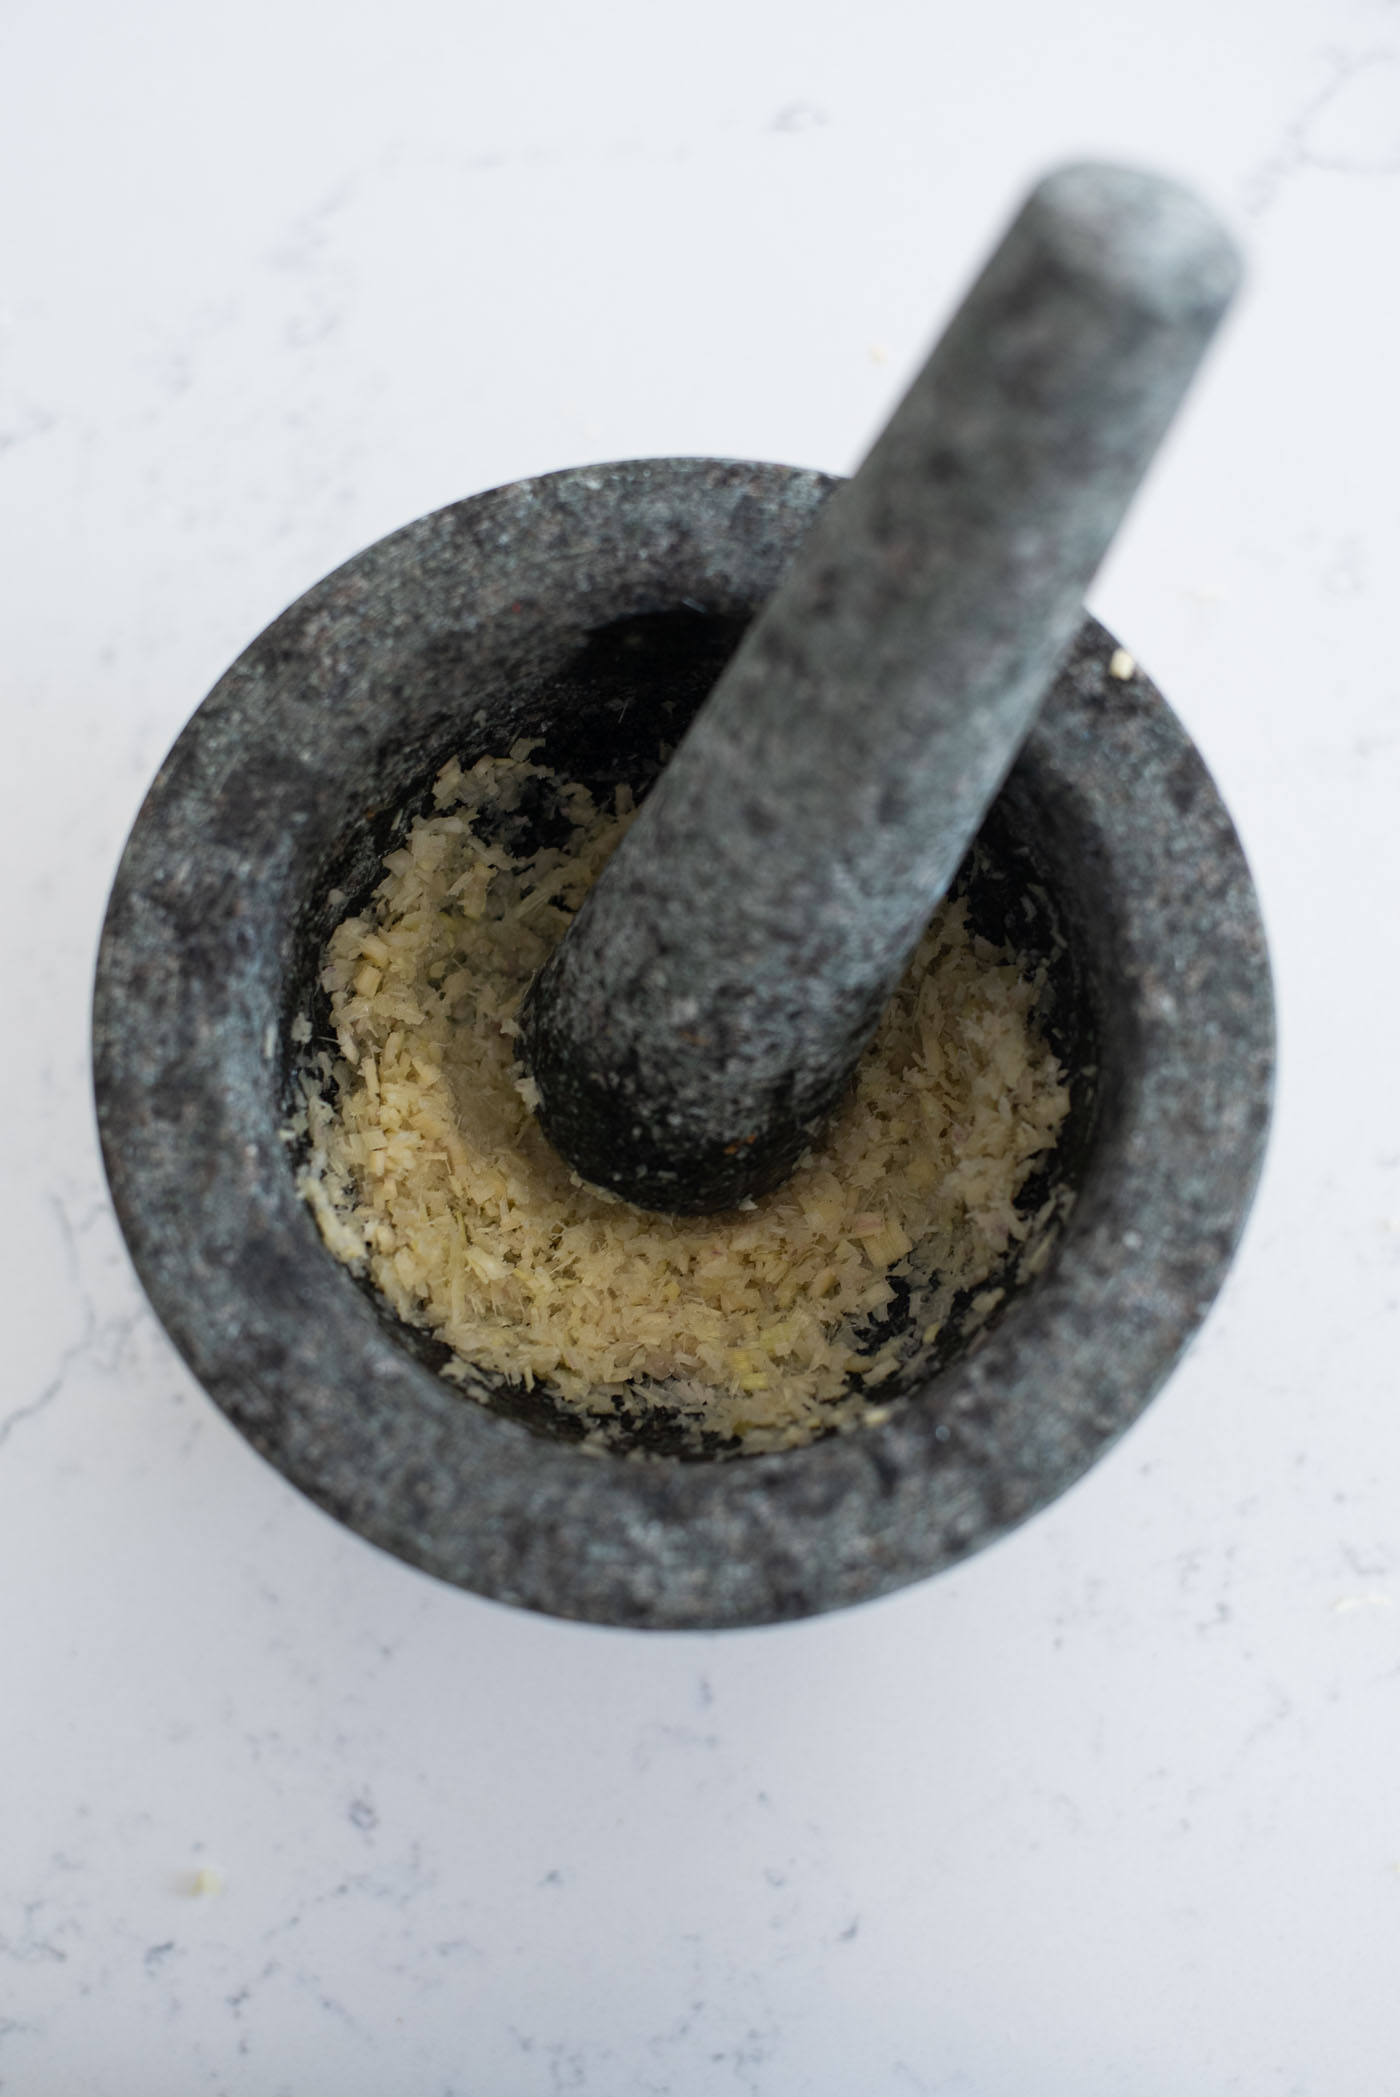 Lemongrass are garlic is pounded with mortar and pestle until grounded.